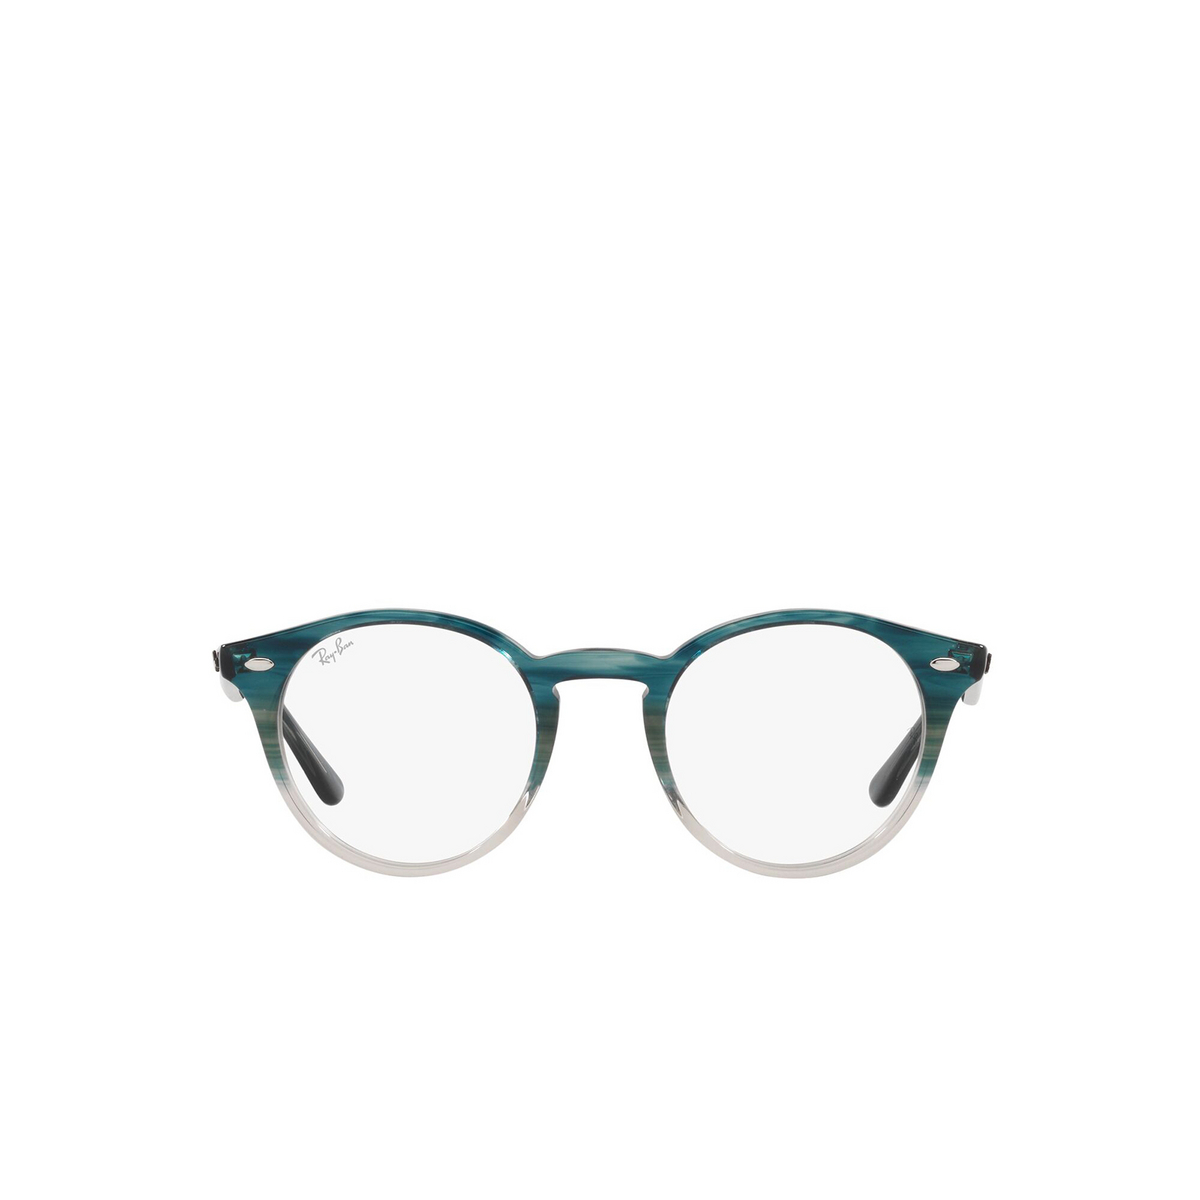 Ray-Ban® Round Eyeglasses: RX2180V color Gradient Turquoise Havana 8146 - front view.